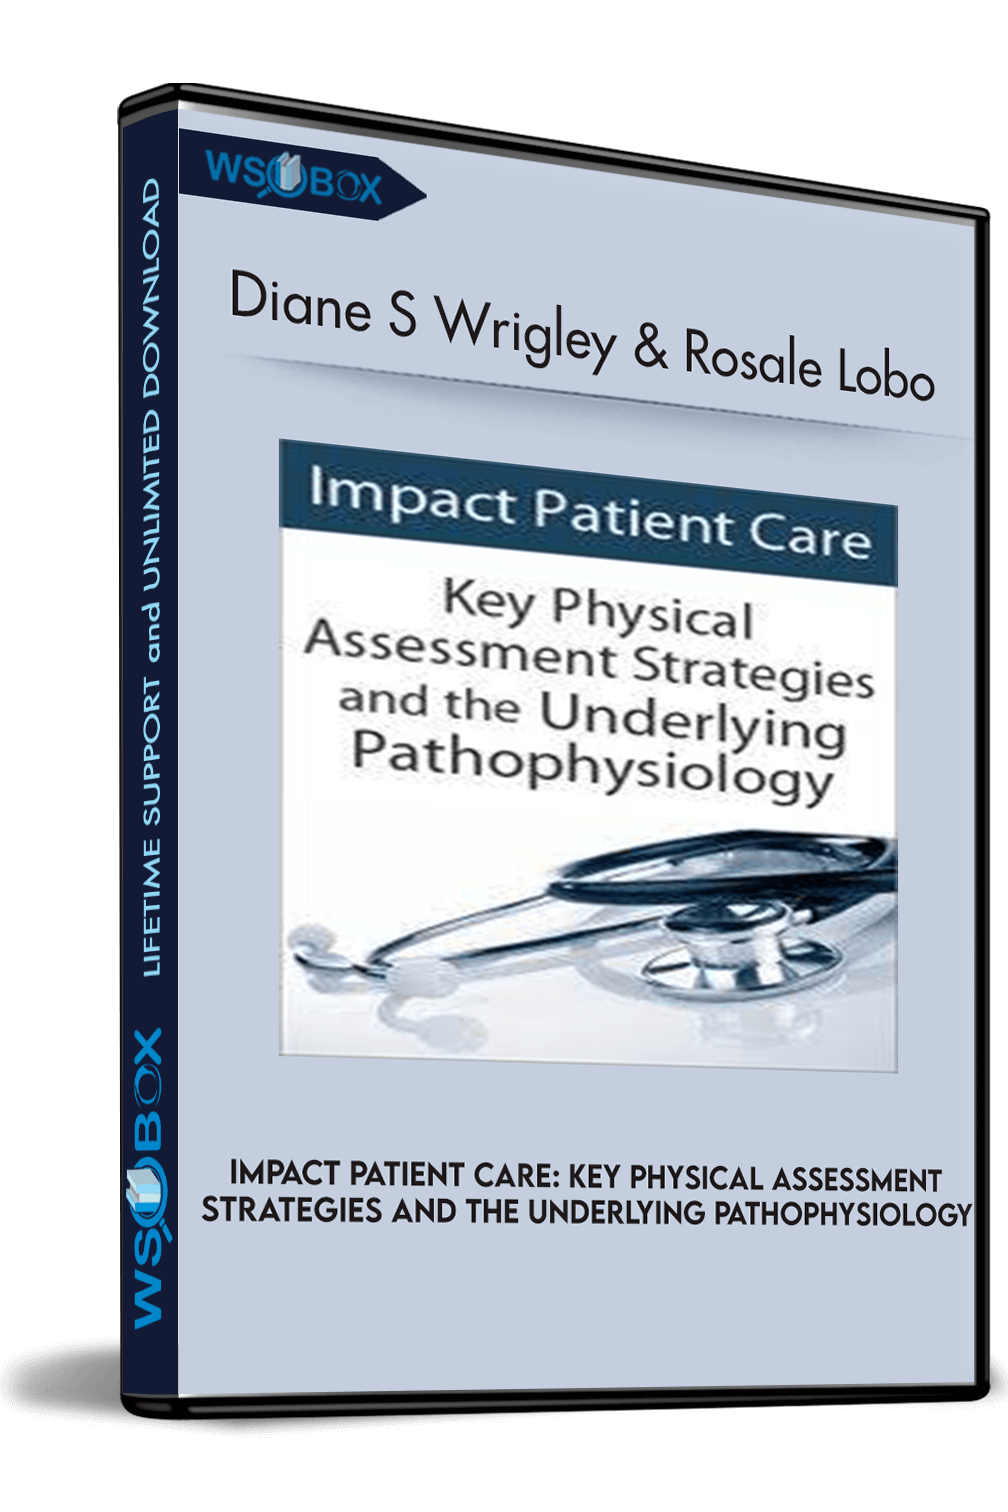 Impact Patient Care: Key Physical Assessment Strategies and the Underlying Pathophysiology – Diane S Wrigley & Rosale Lobo